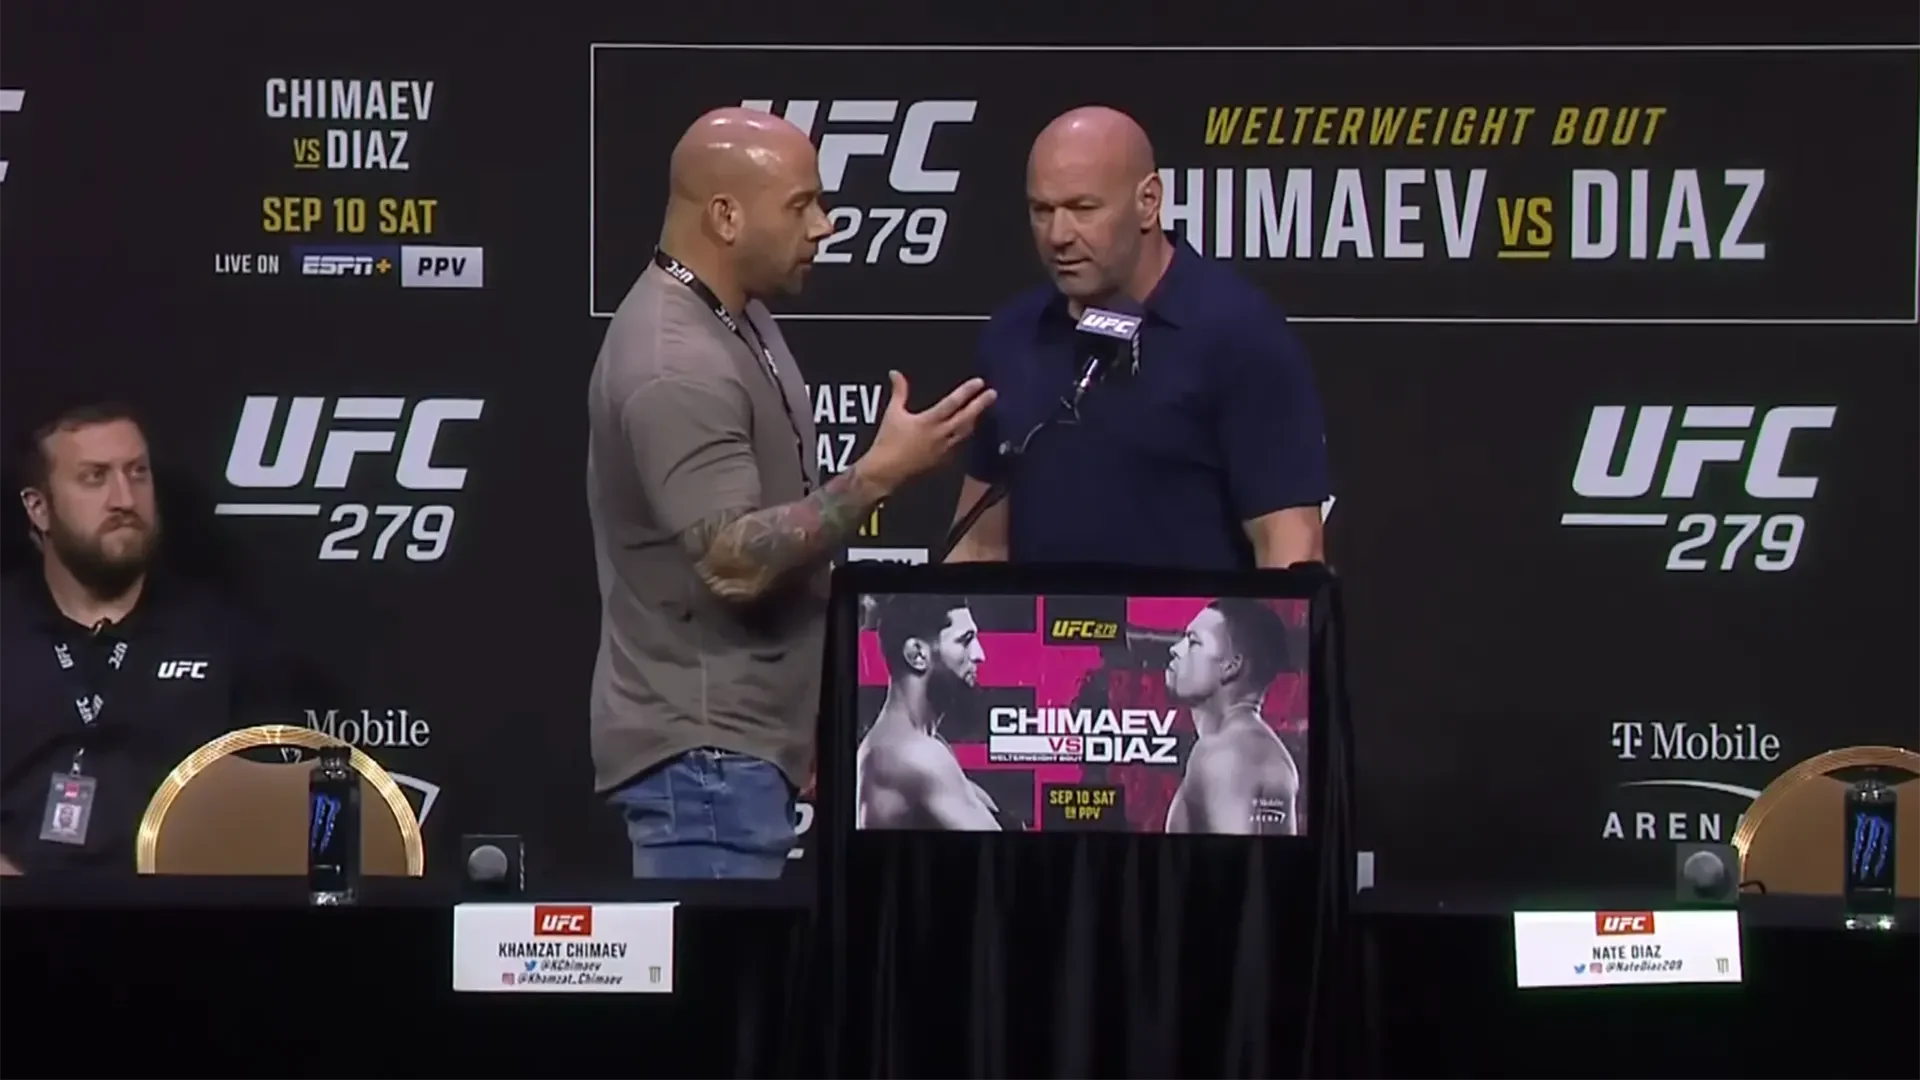 Dana White Canceled UFC 279 Pre Fight Press Conference Due To Backstage Altercation